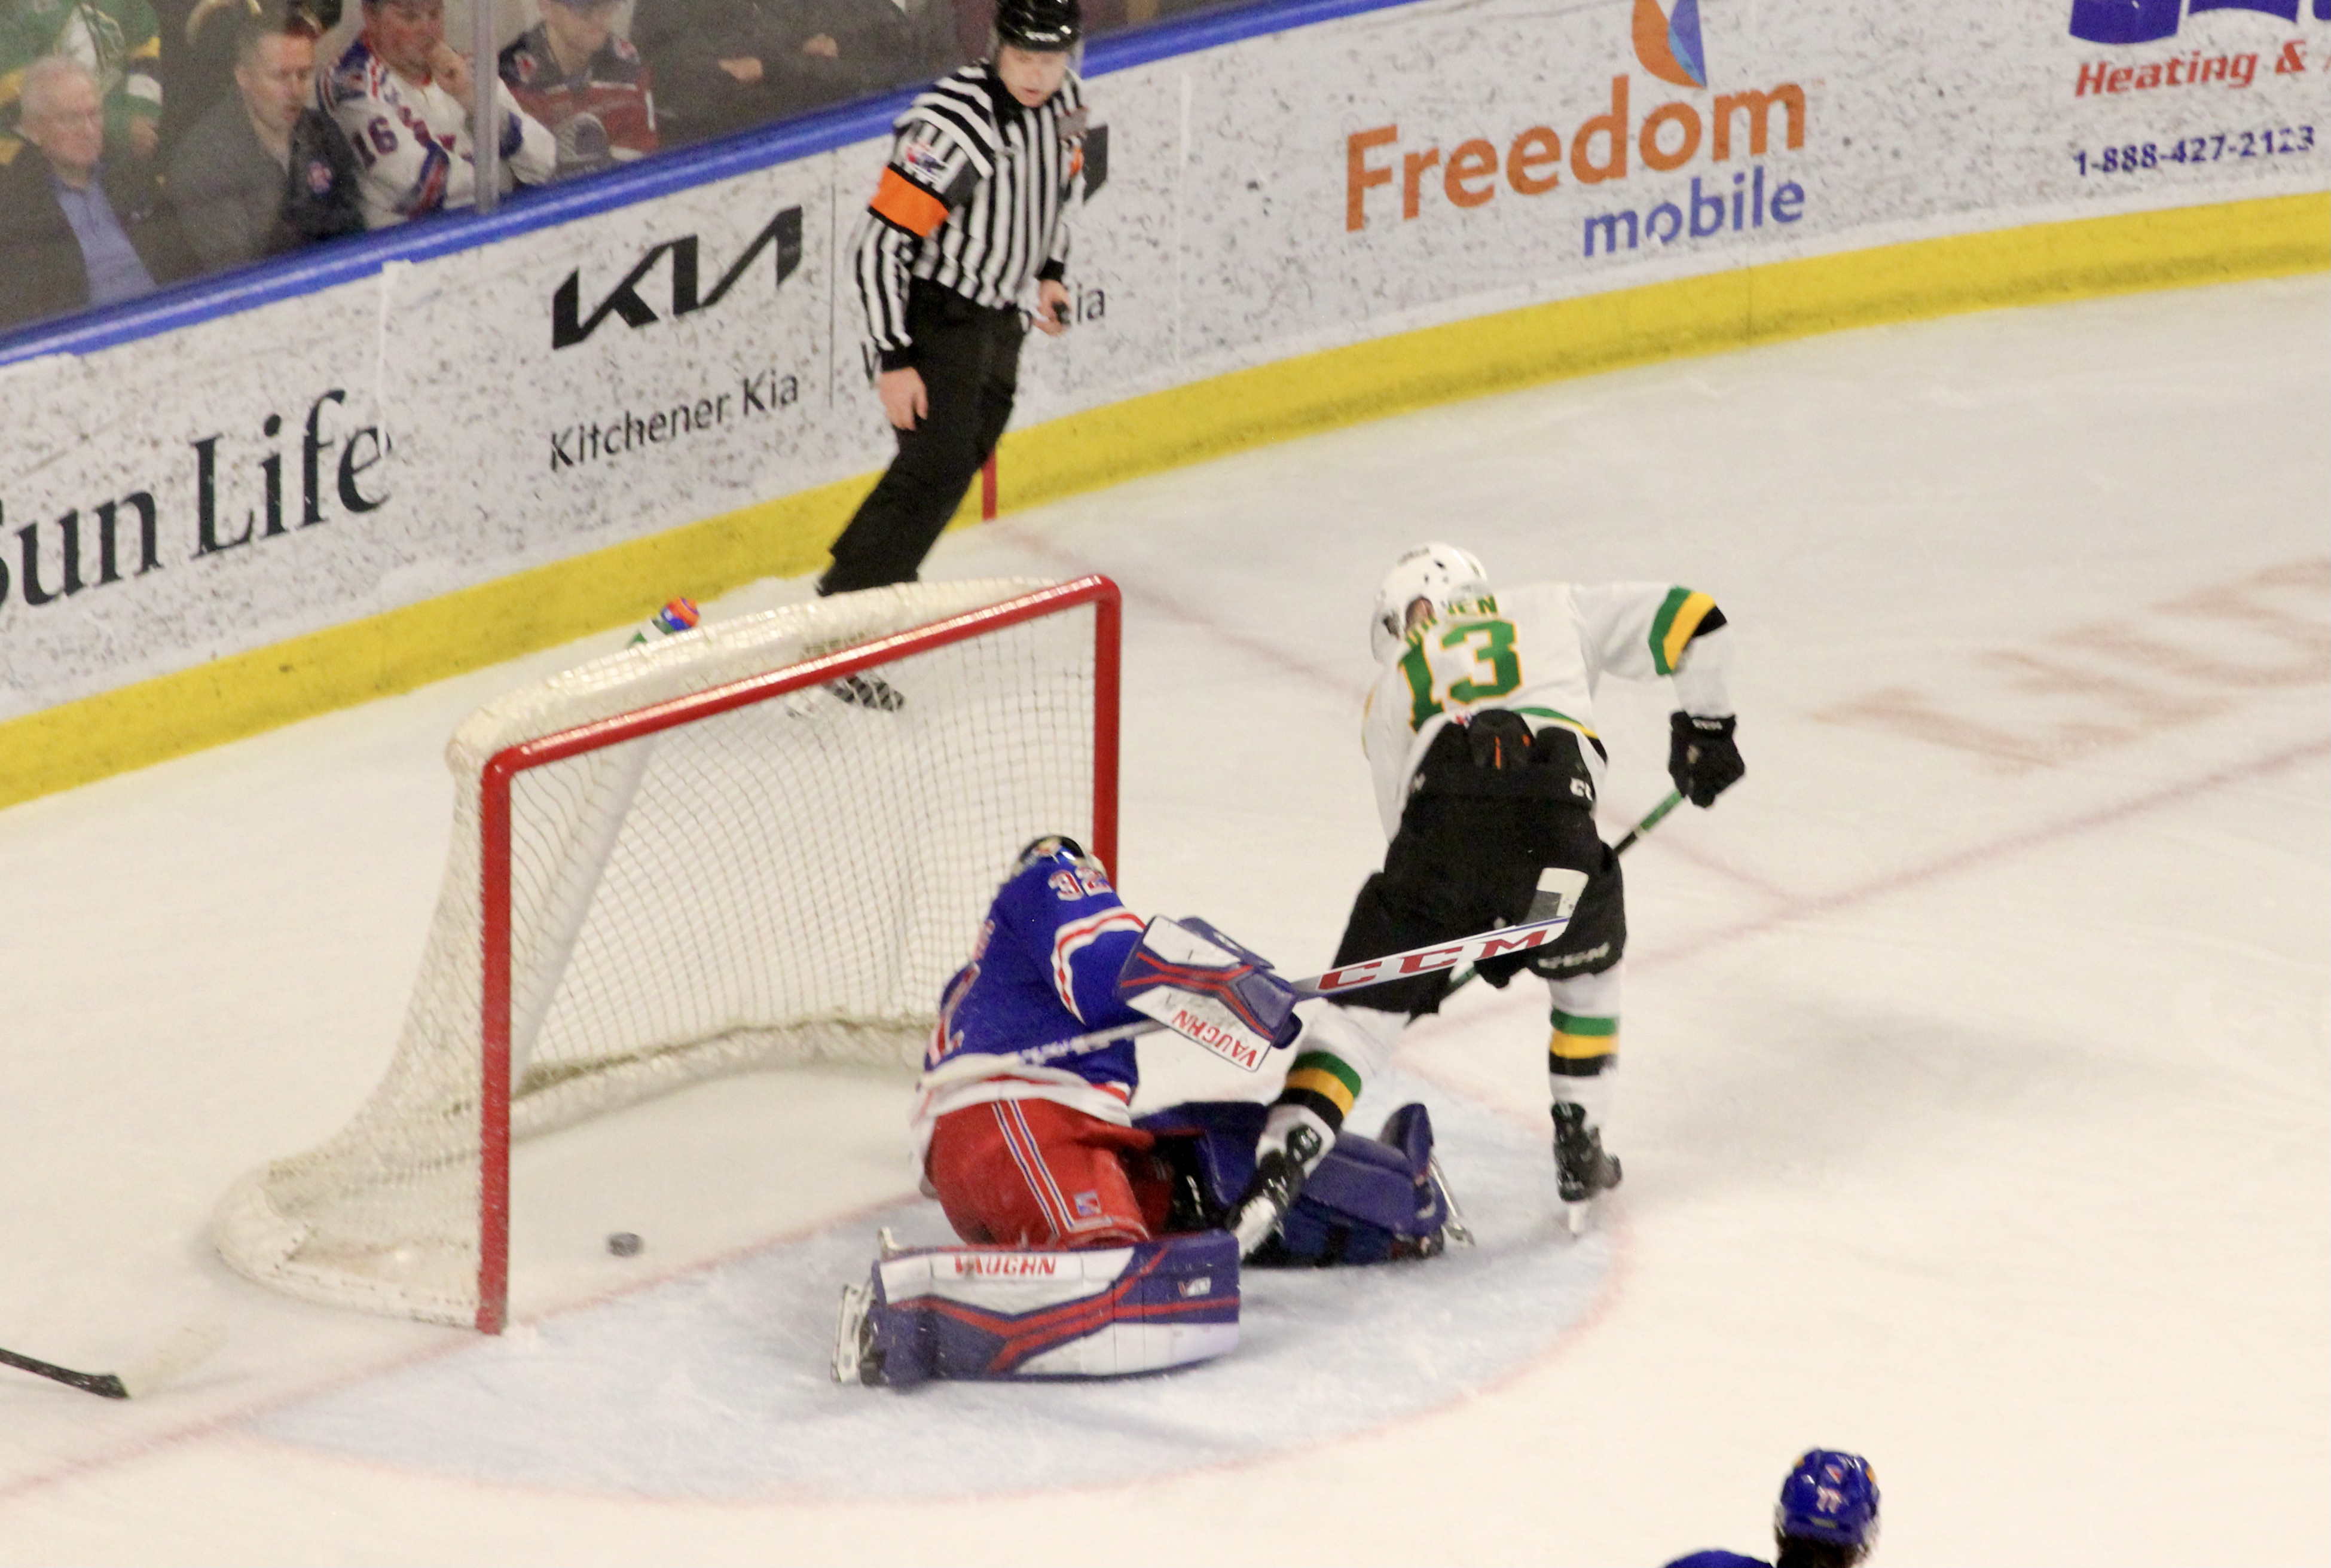 London Knights beat Kitchener 6-4 to take a 3-0 series lead over the
Rangers